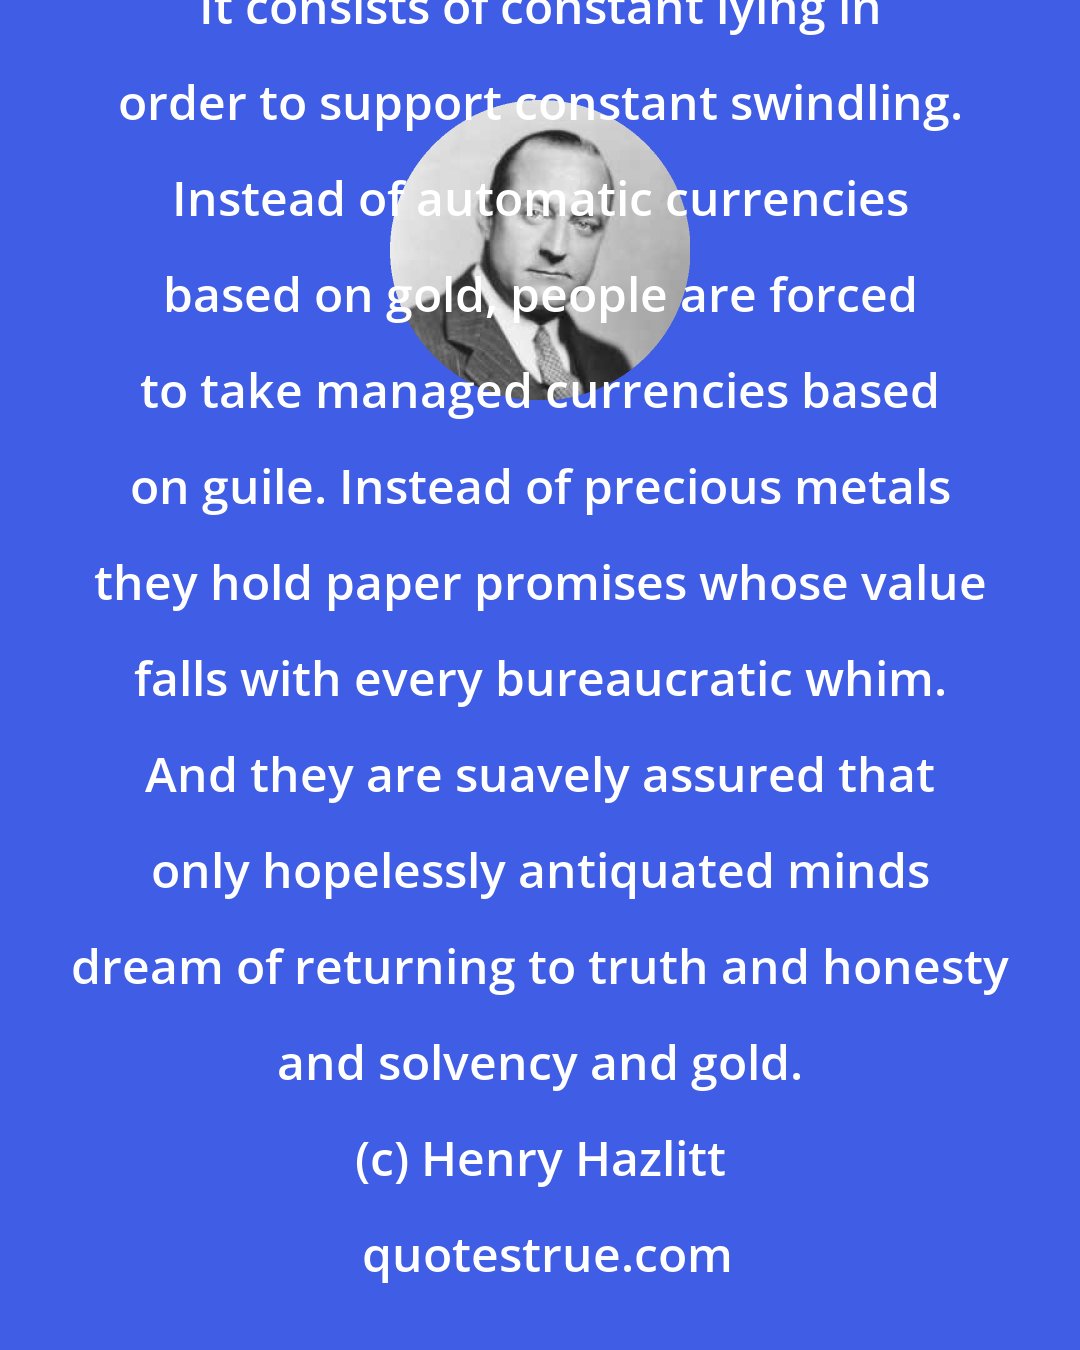 Henry Hazlitt: In practice [monetary management] is merely a high-sounding euphemism for continuous currency debasement. It consists of constant lying in order to support constant swindling. Instead of automatic currencies based on gold, people are forced to take managed currencies based on guile. Instead of precious metals they hold paper promises whose value falls with every bureaucratic whim. And they are suavely assured that only hopelessly antiquated minds dream of returning to truth and honesty and solvency and gold.